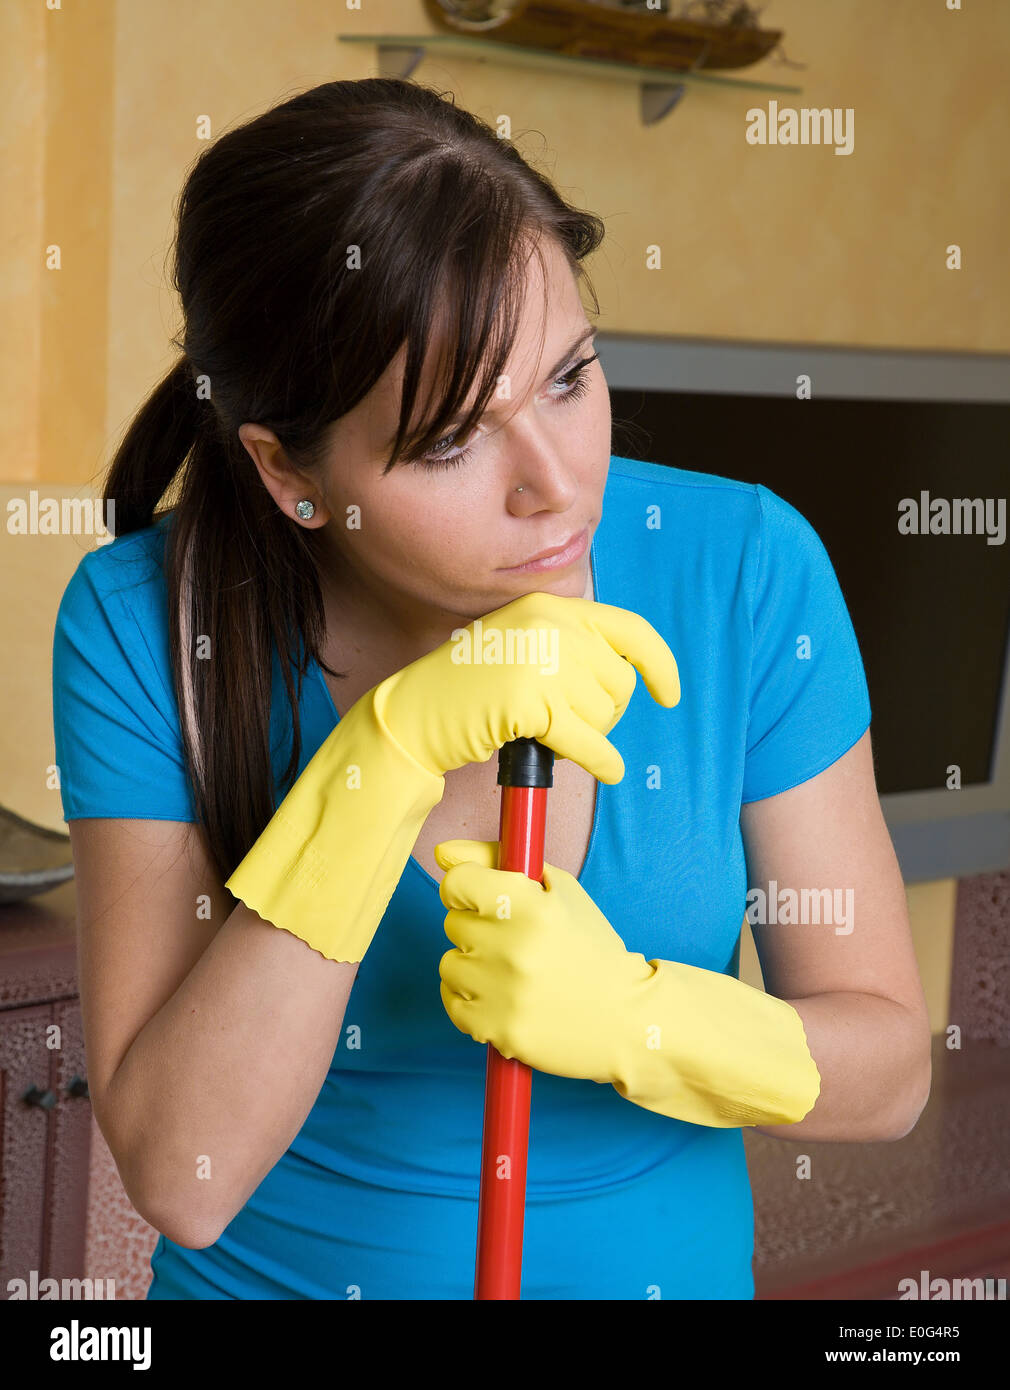 house cleaning work woman Stock Photo